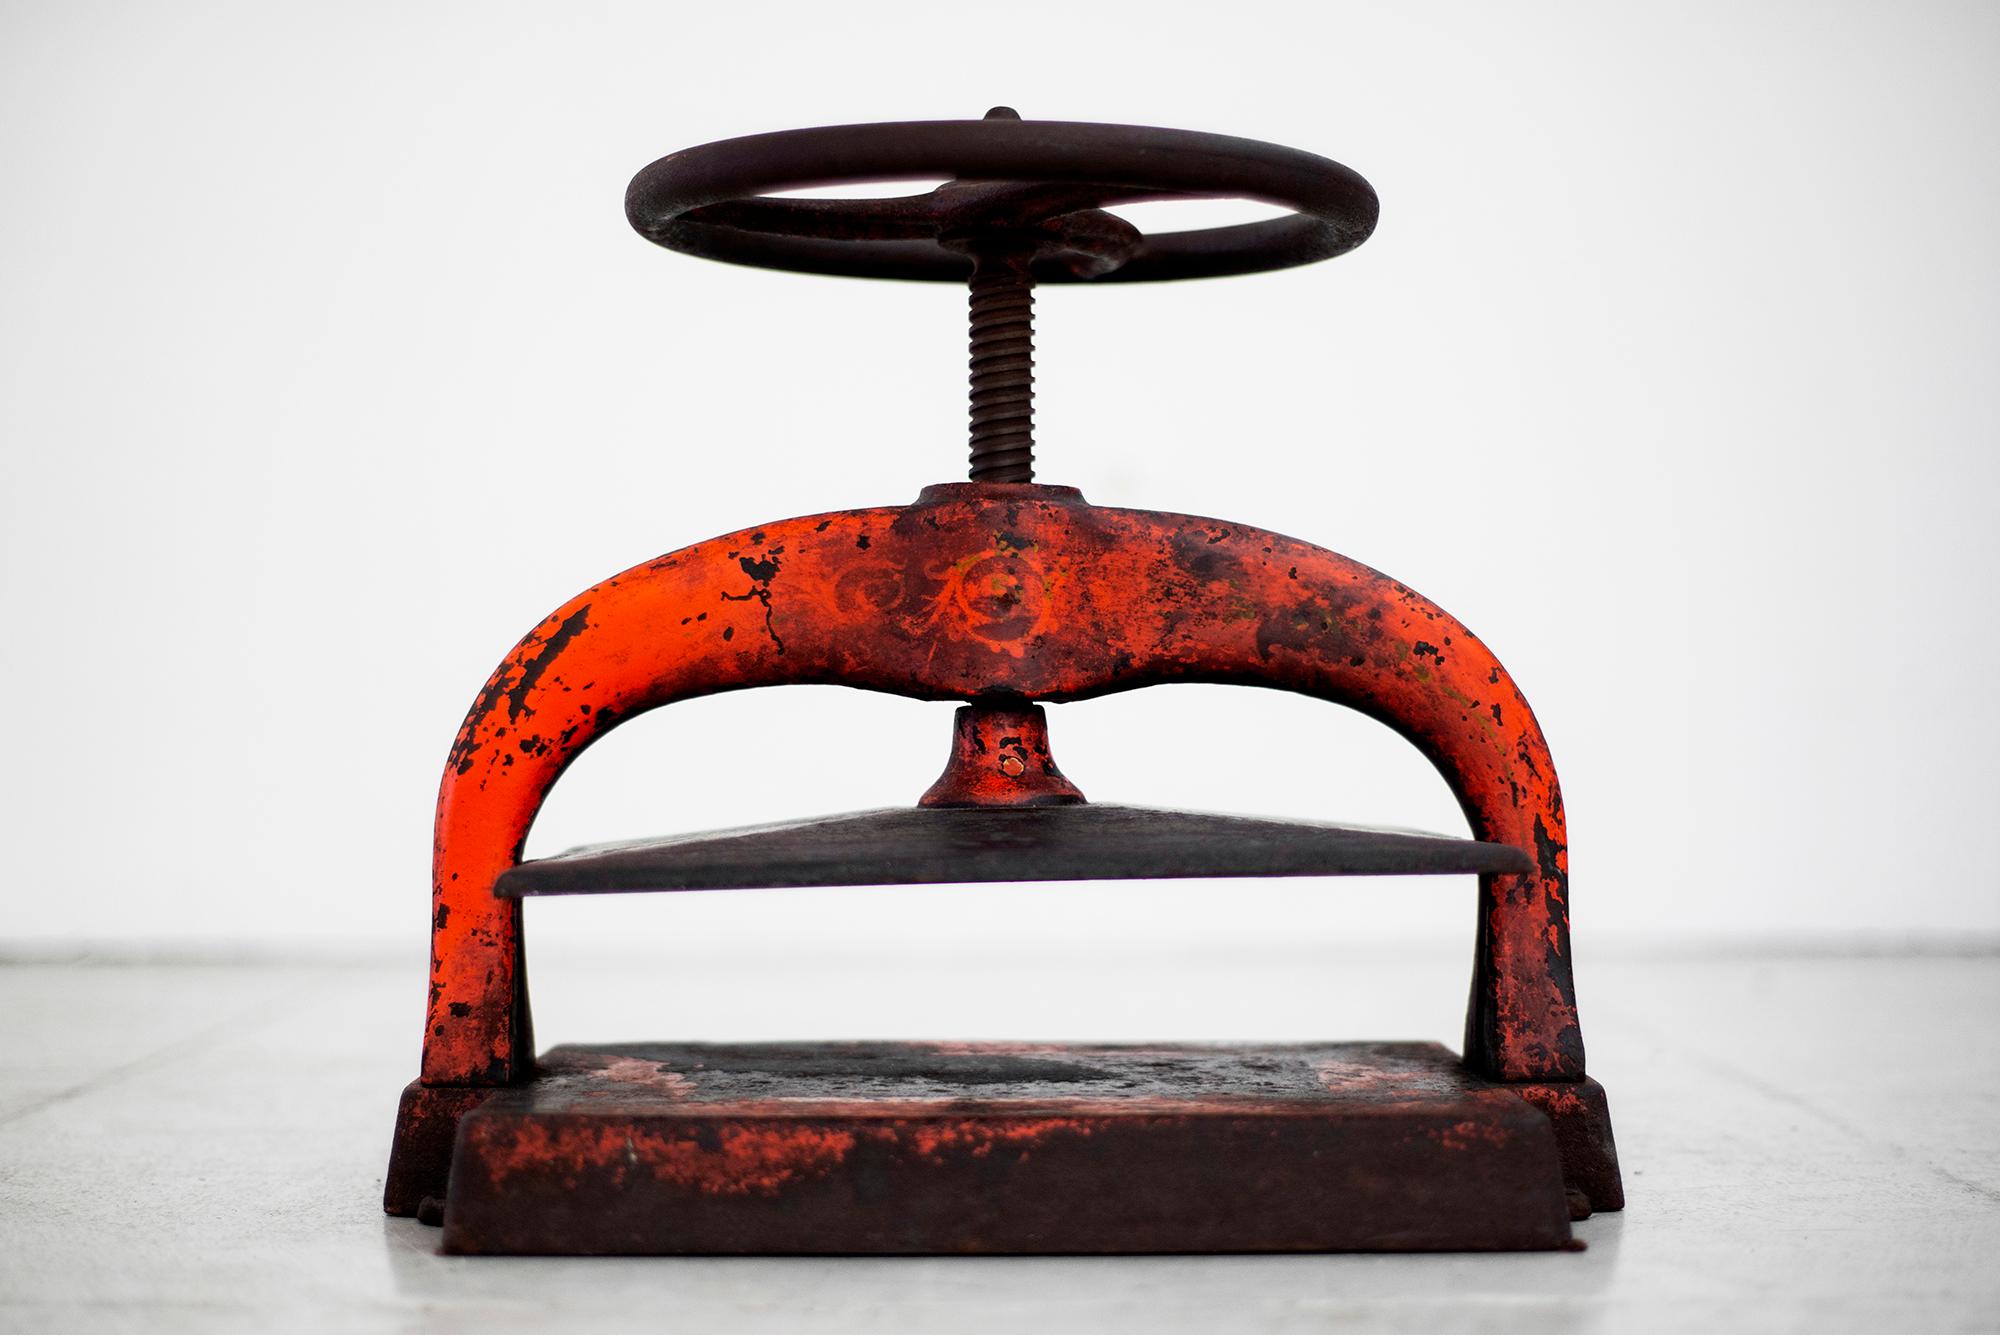 Original industrial book press of solid iron with great patina
Wonderful object for a book collection!